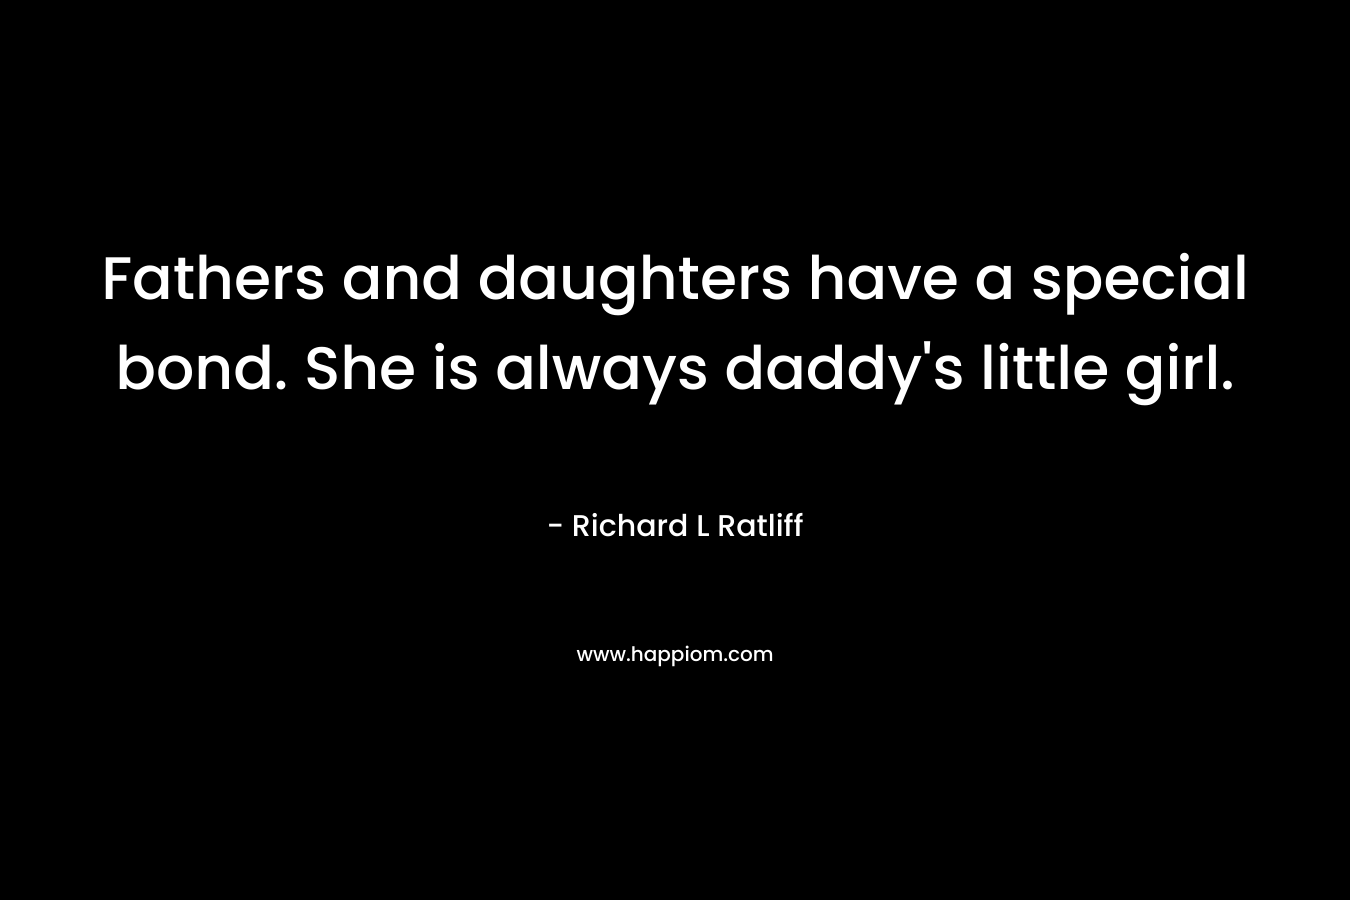 Fathers and daughters have a special bond. She is always daddy's little girl.